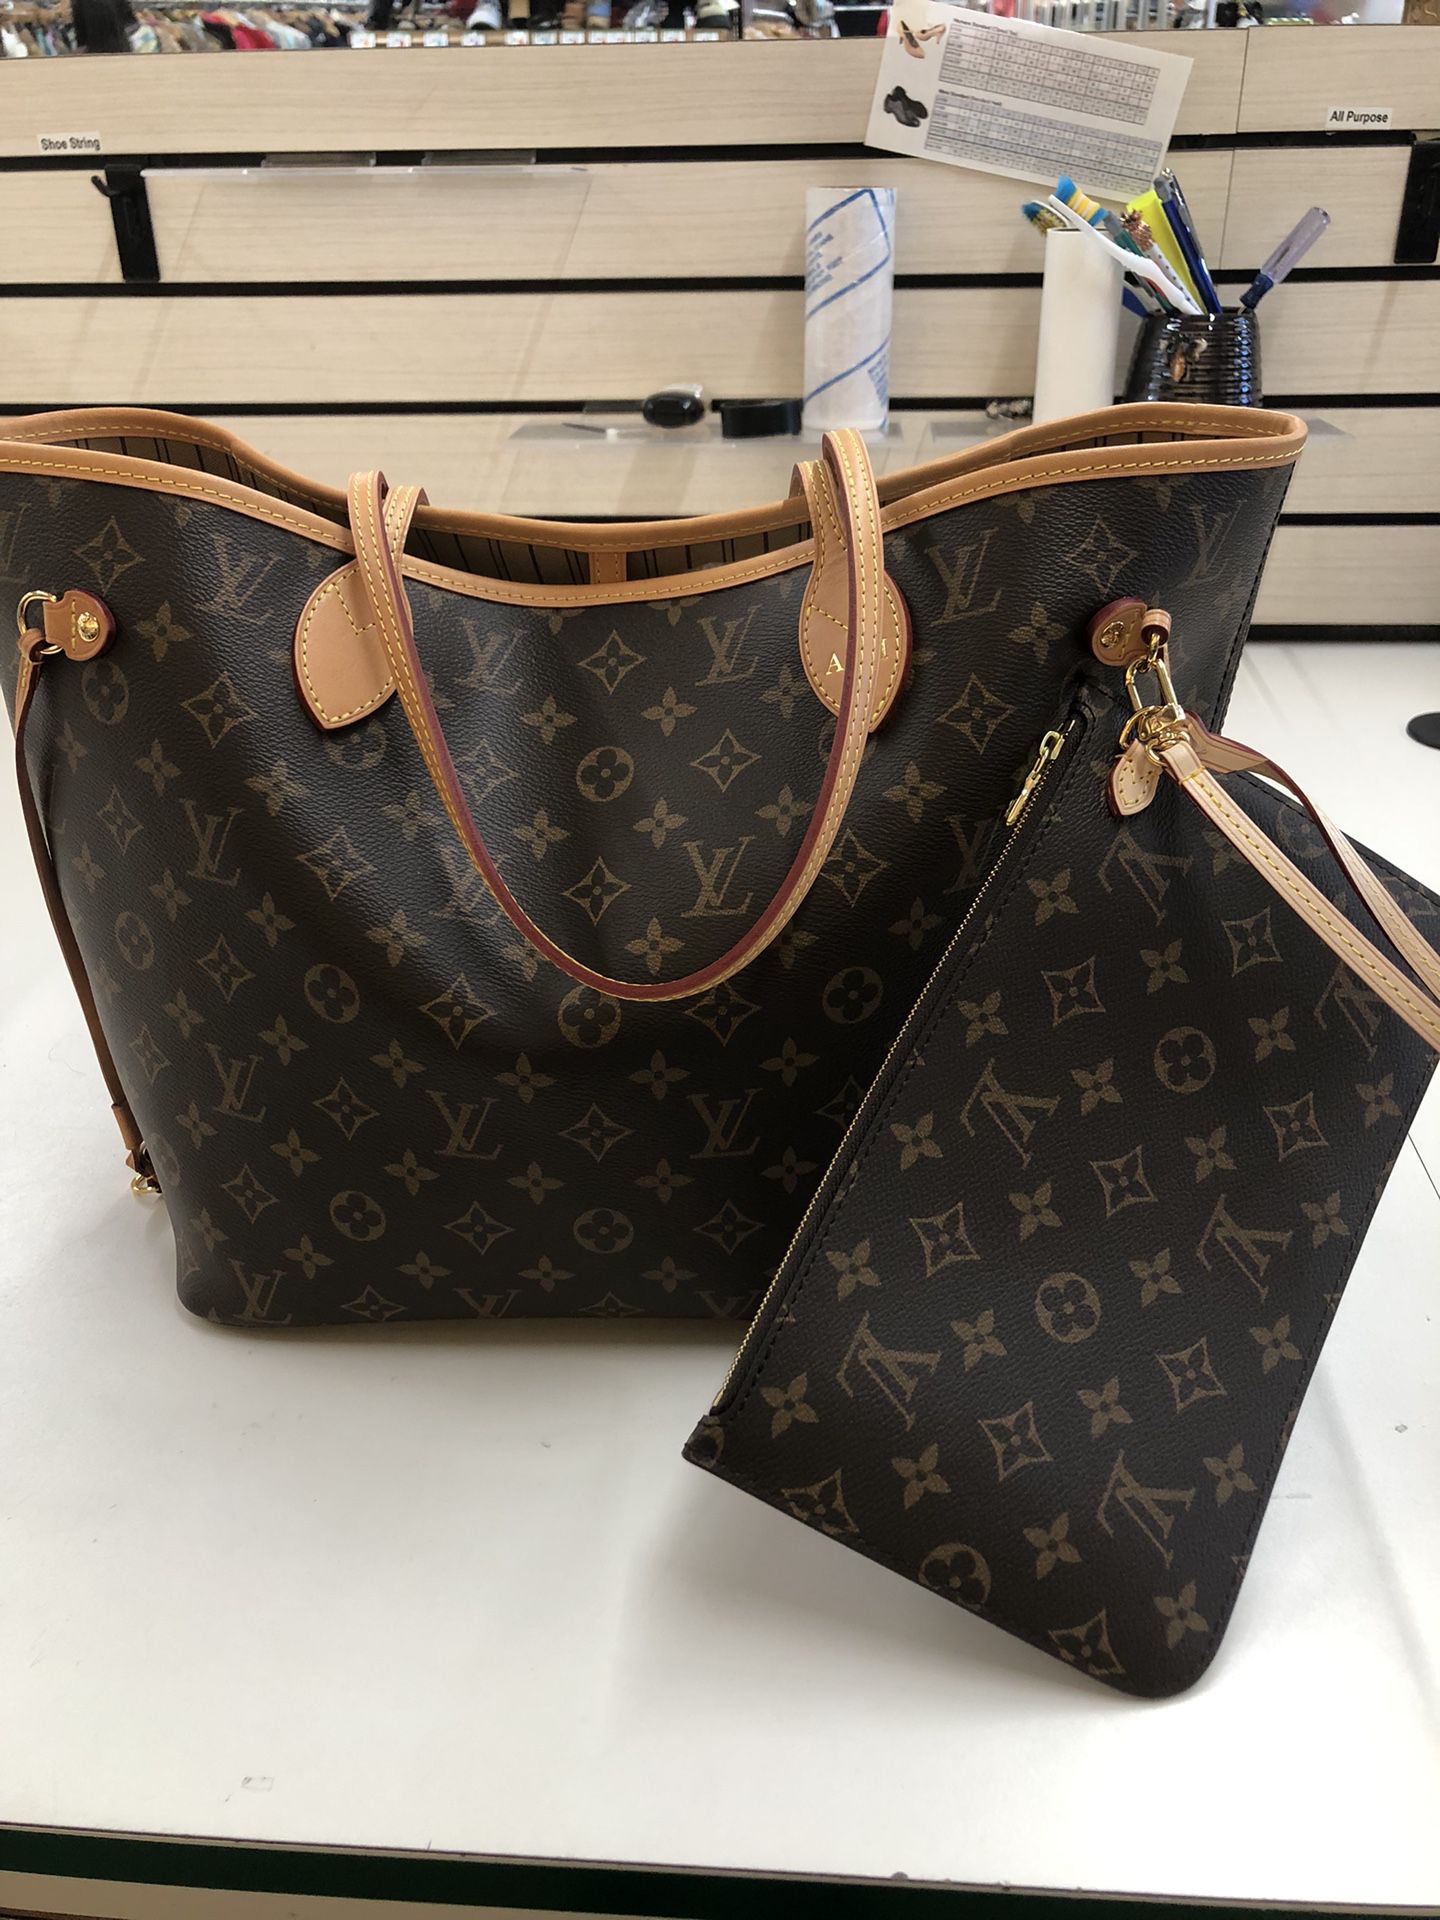 Louis Vuitton Neverfull MM Monogram for Sale in Fountain Valley